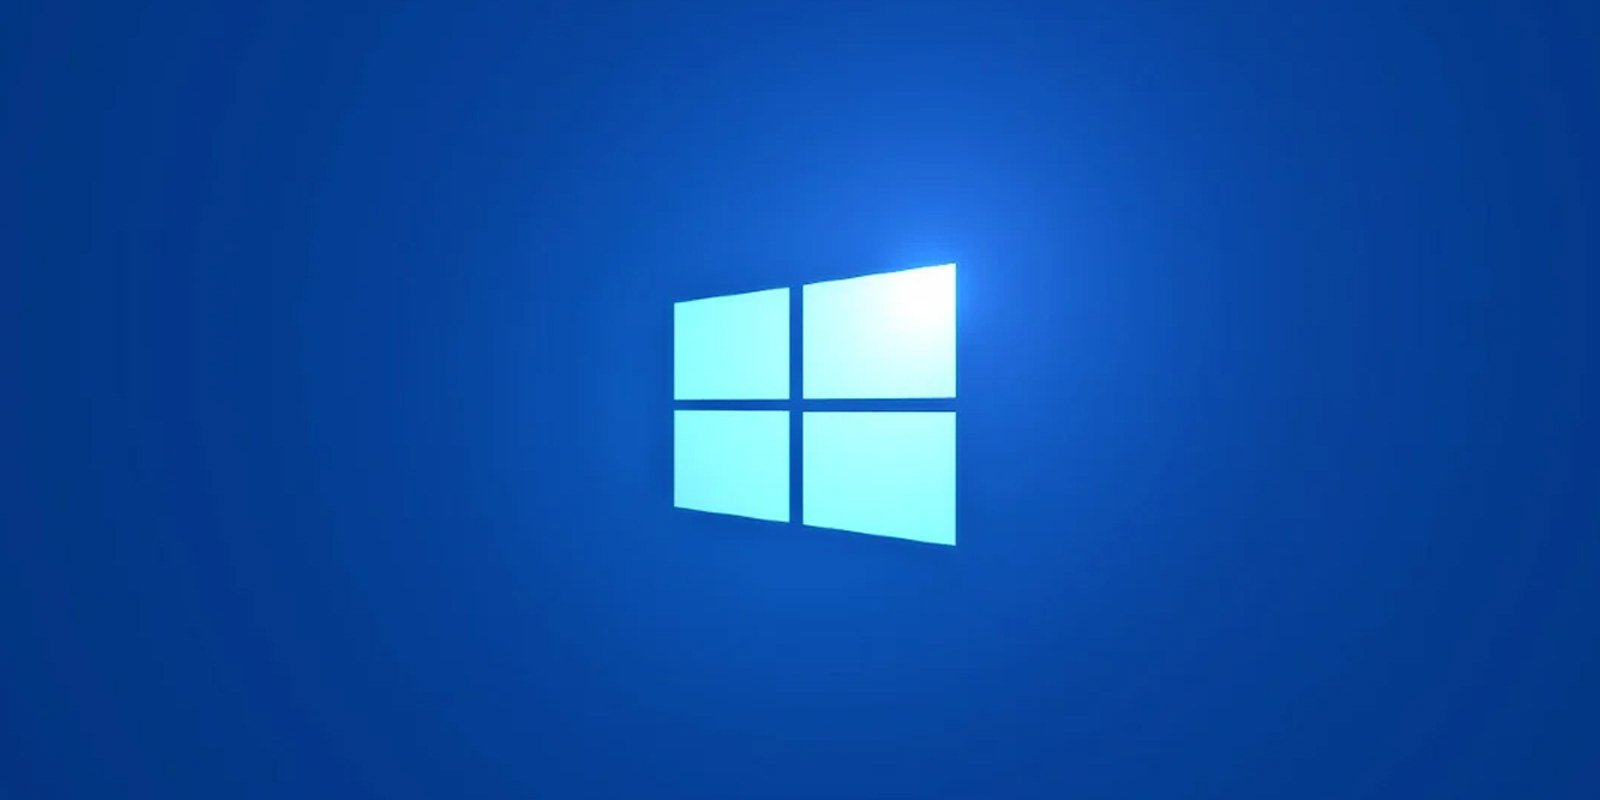 Windows 10 21H2 now in broad deployment, available to everyone